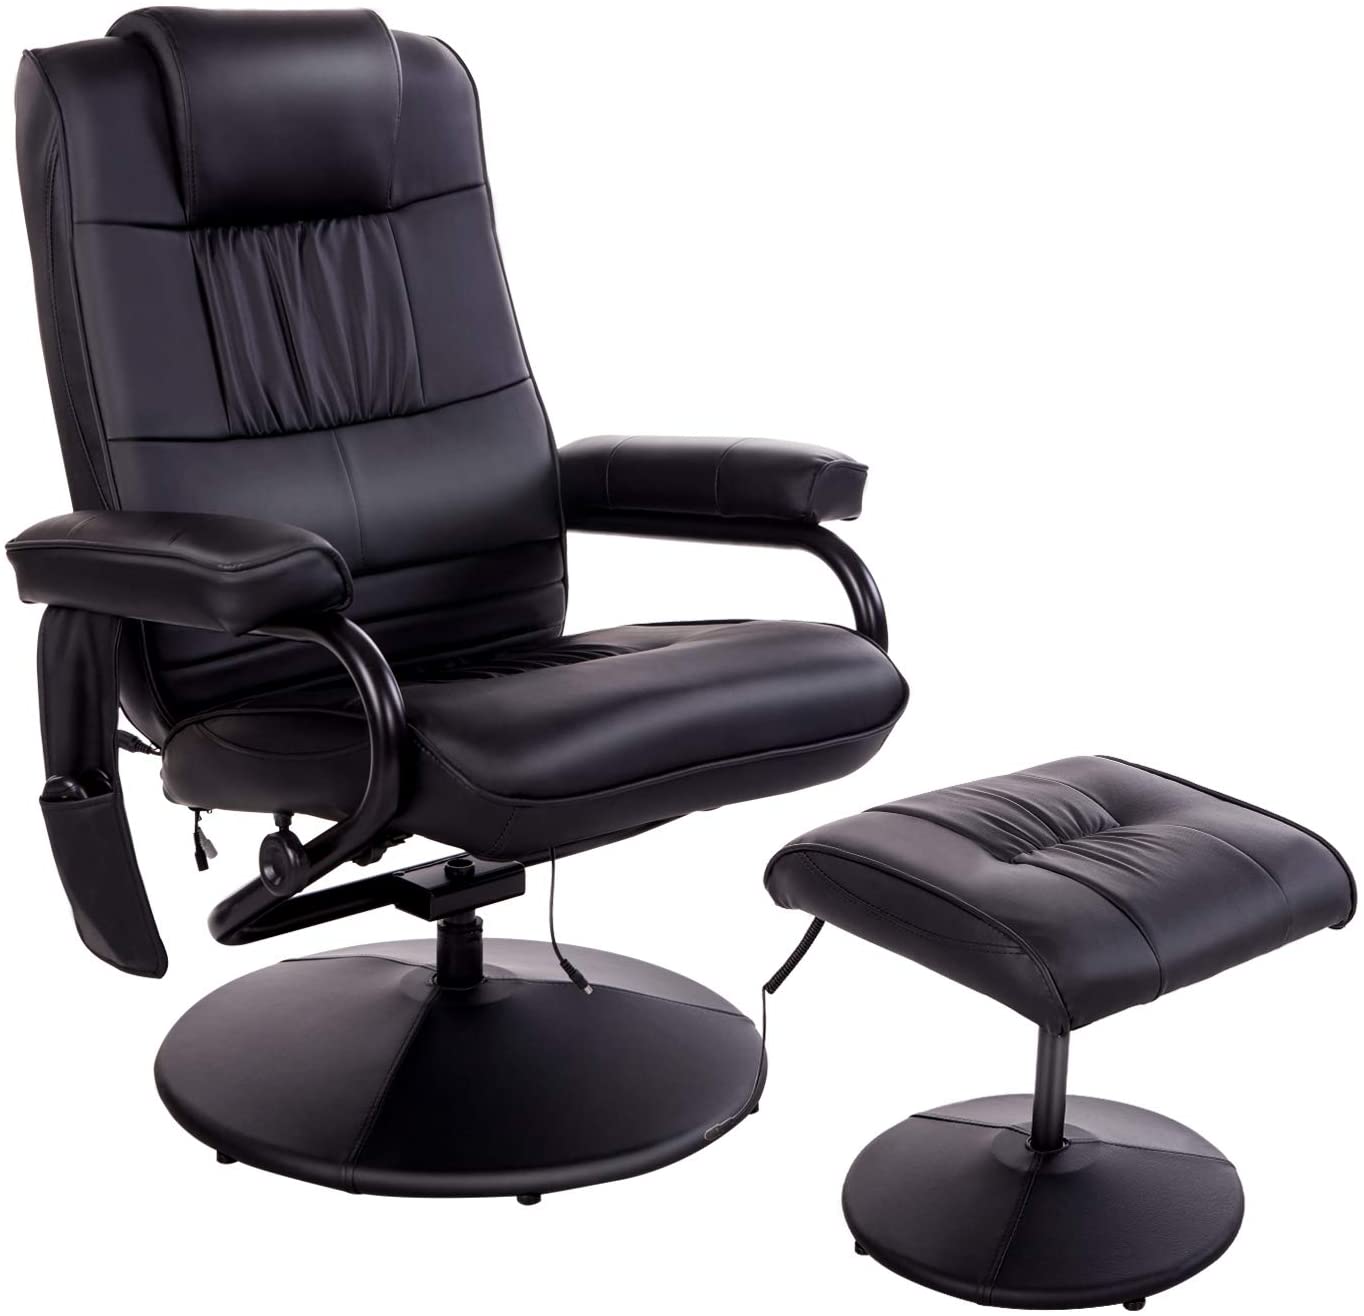 HomCom Massaging Faux Leather Recliner Chair And Ottoman Set